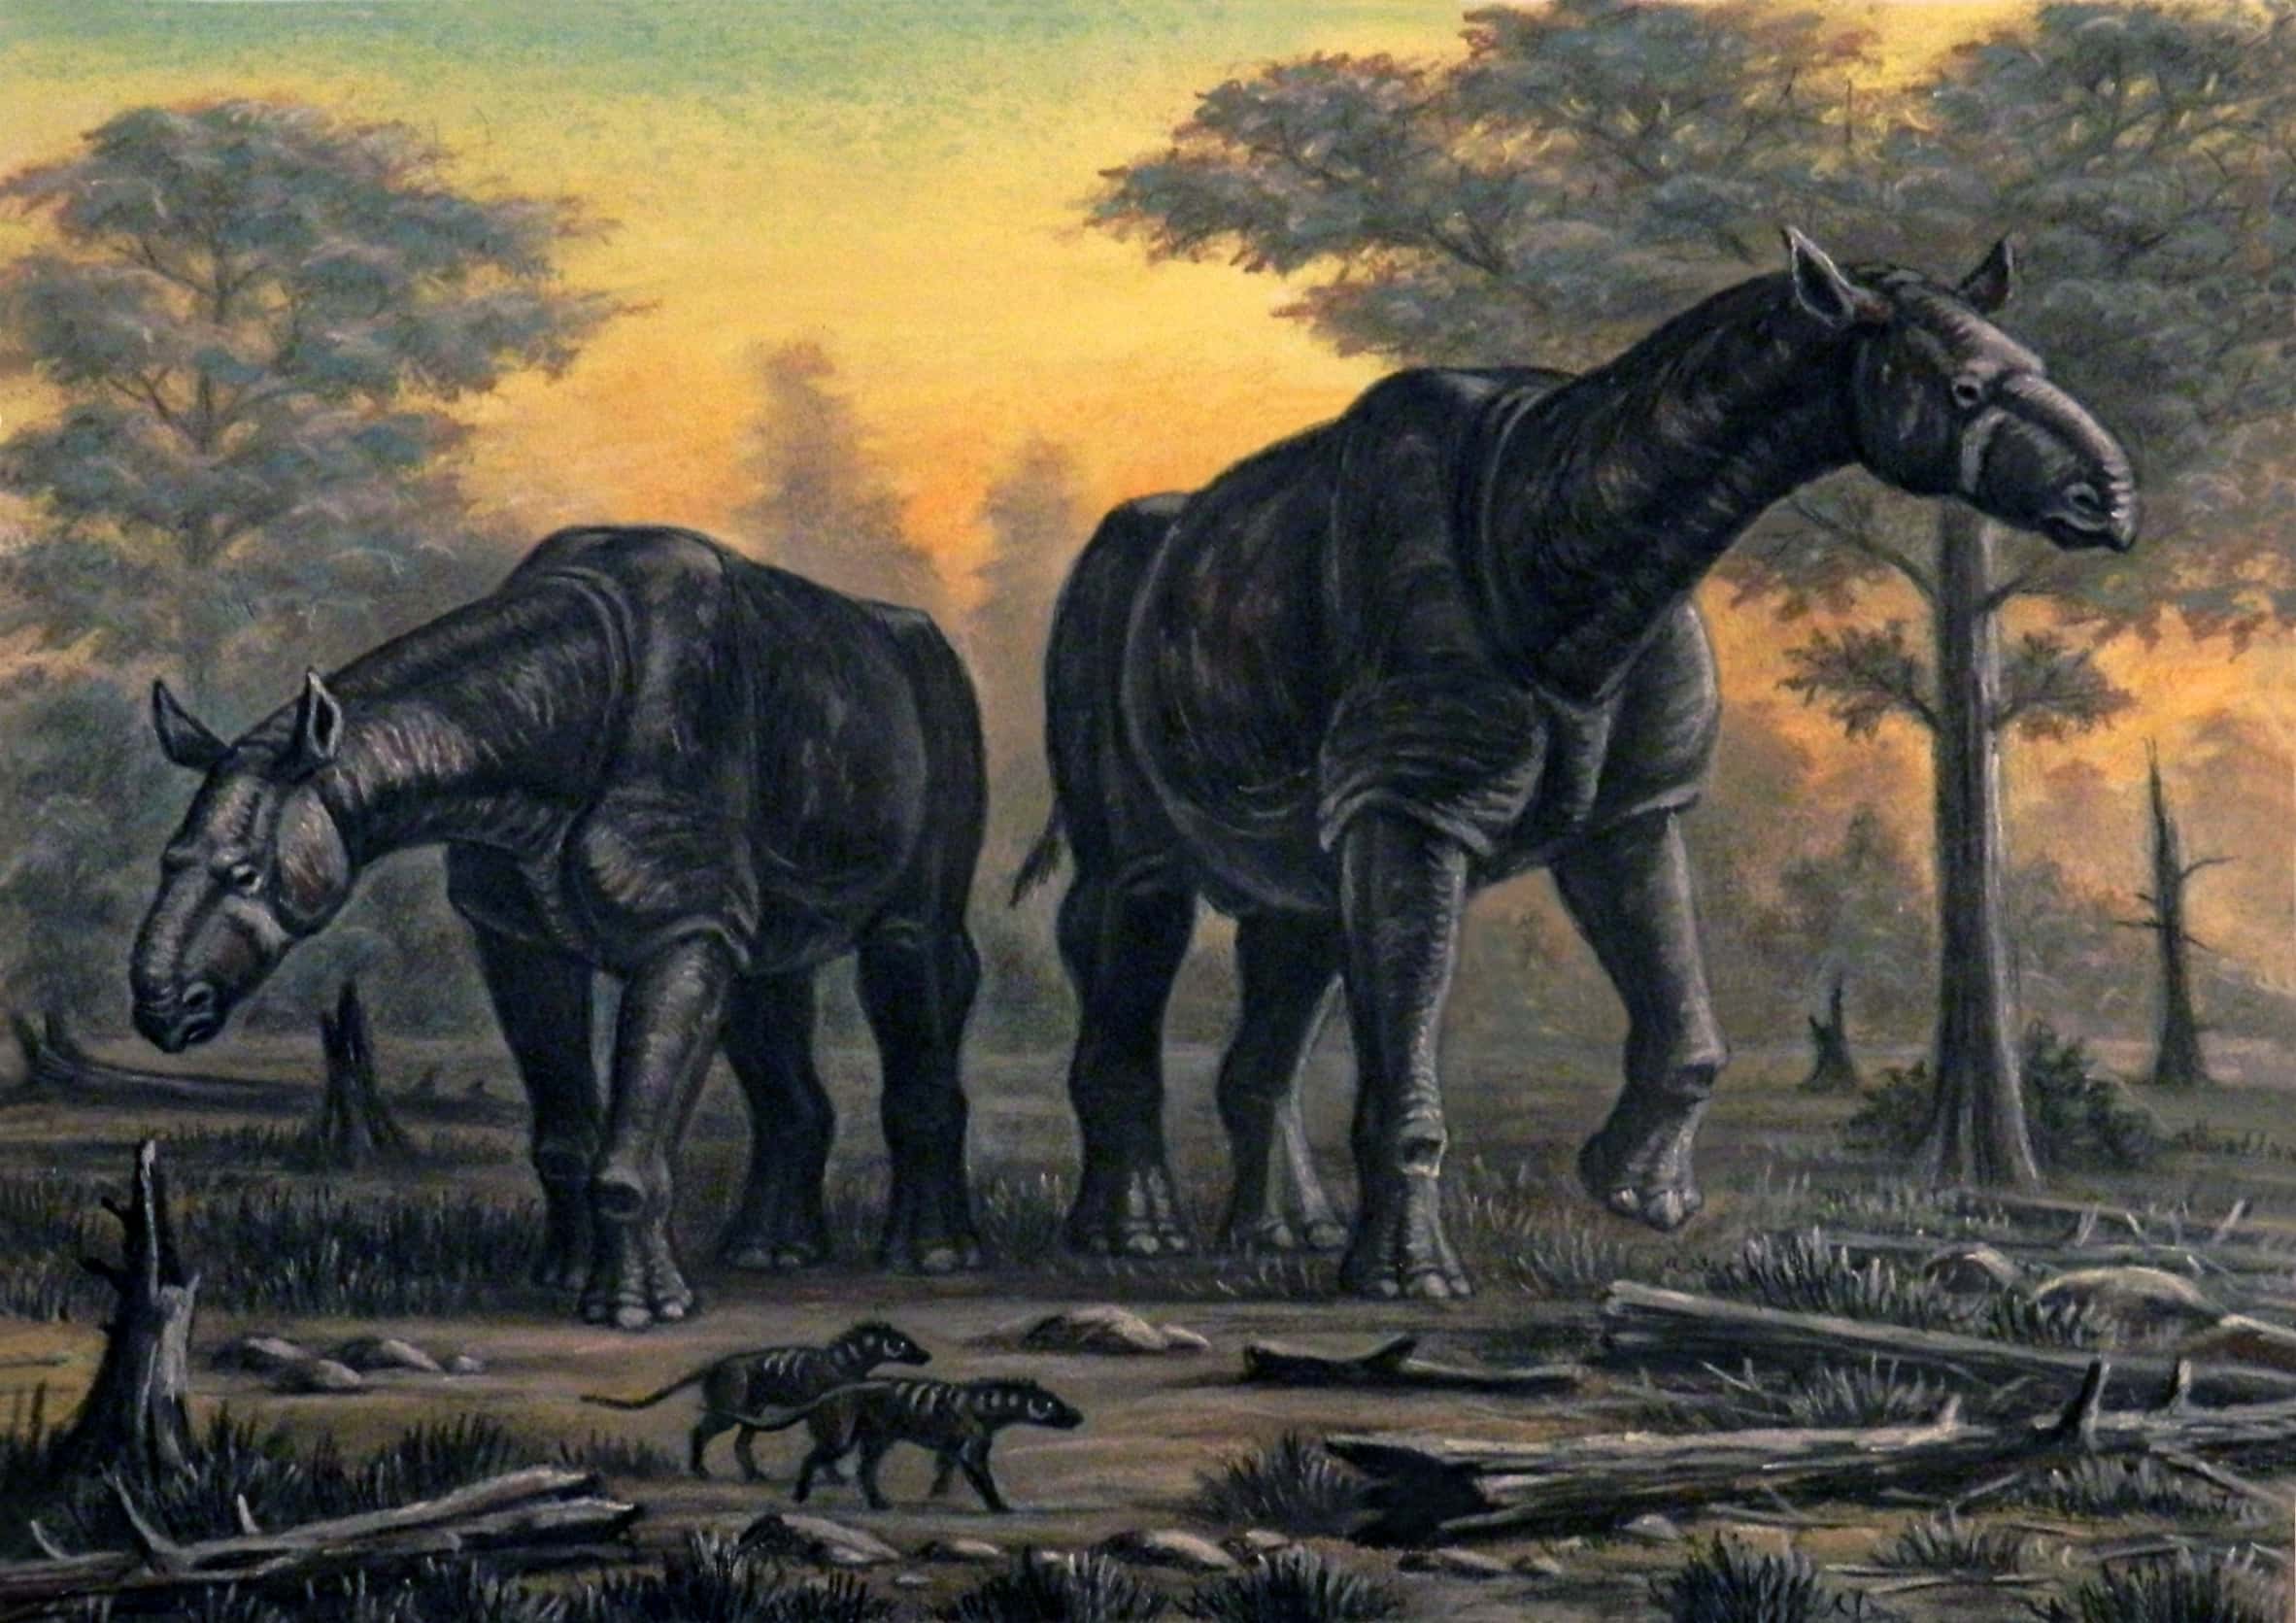 Deinotherium, Prehistoric Earth: A Natural History Wiki